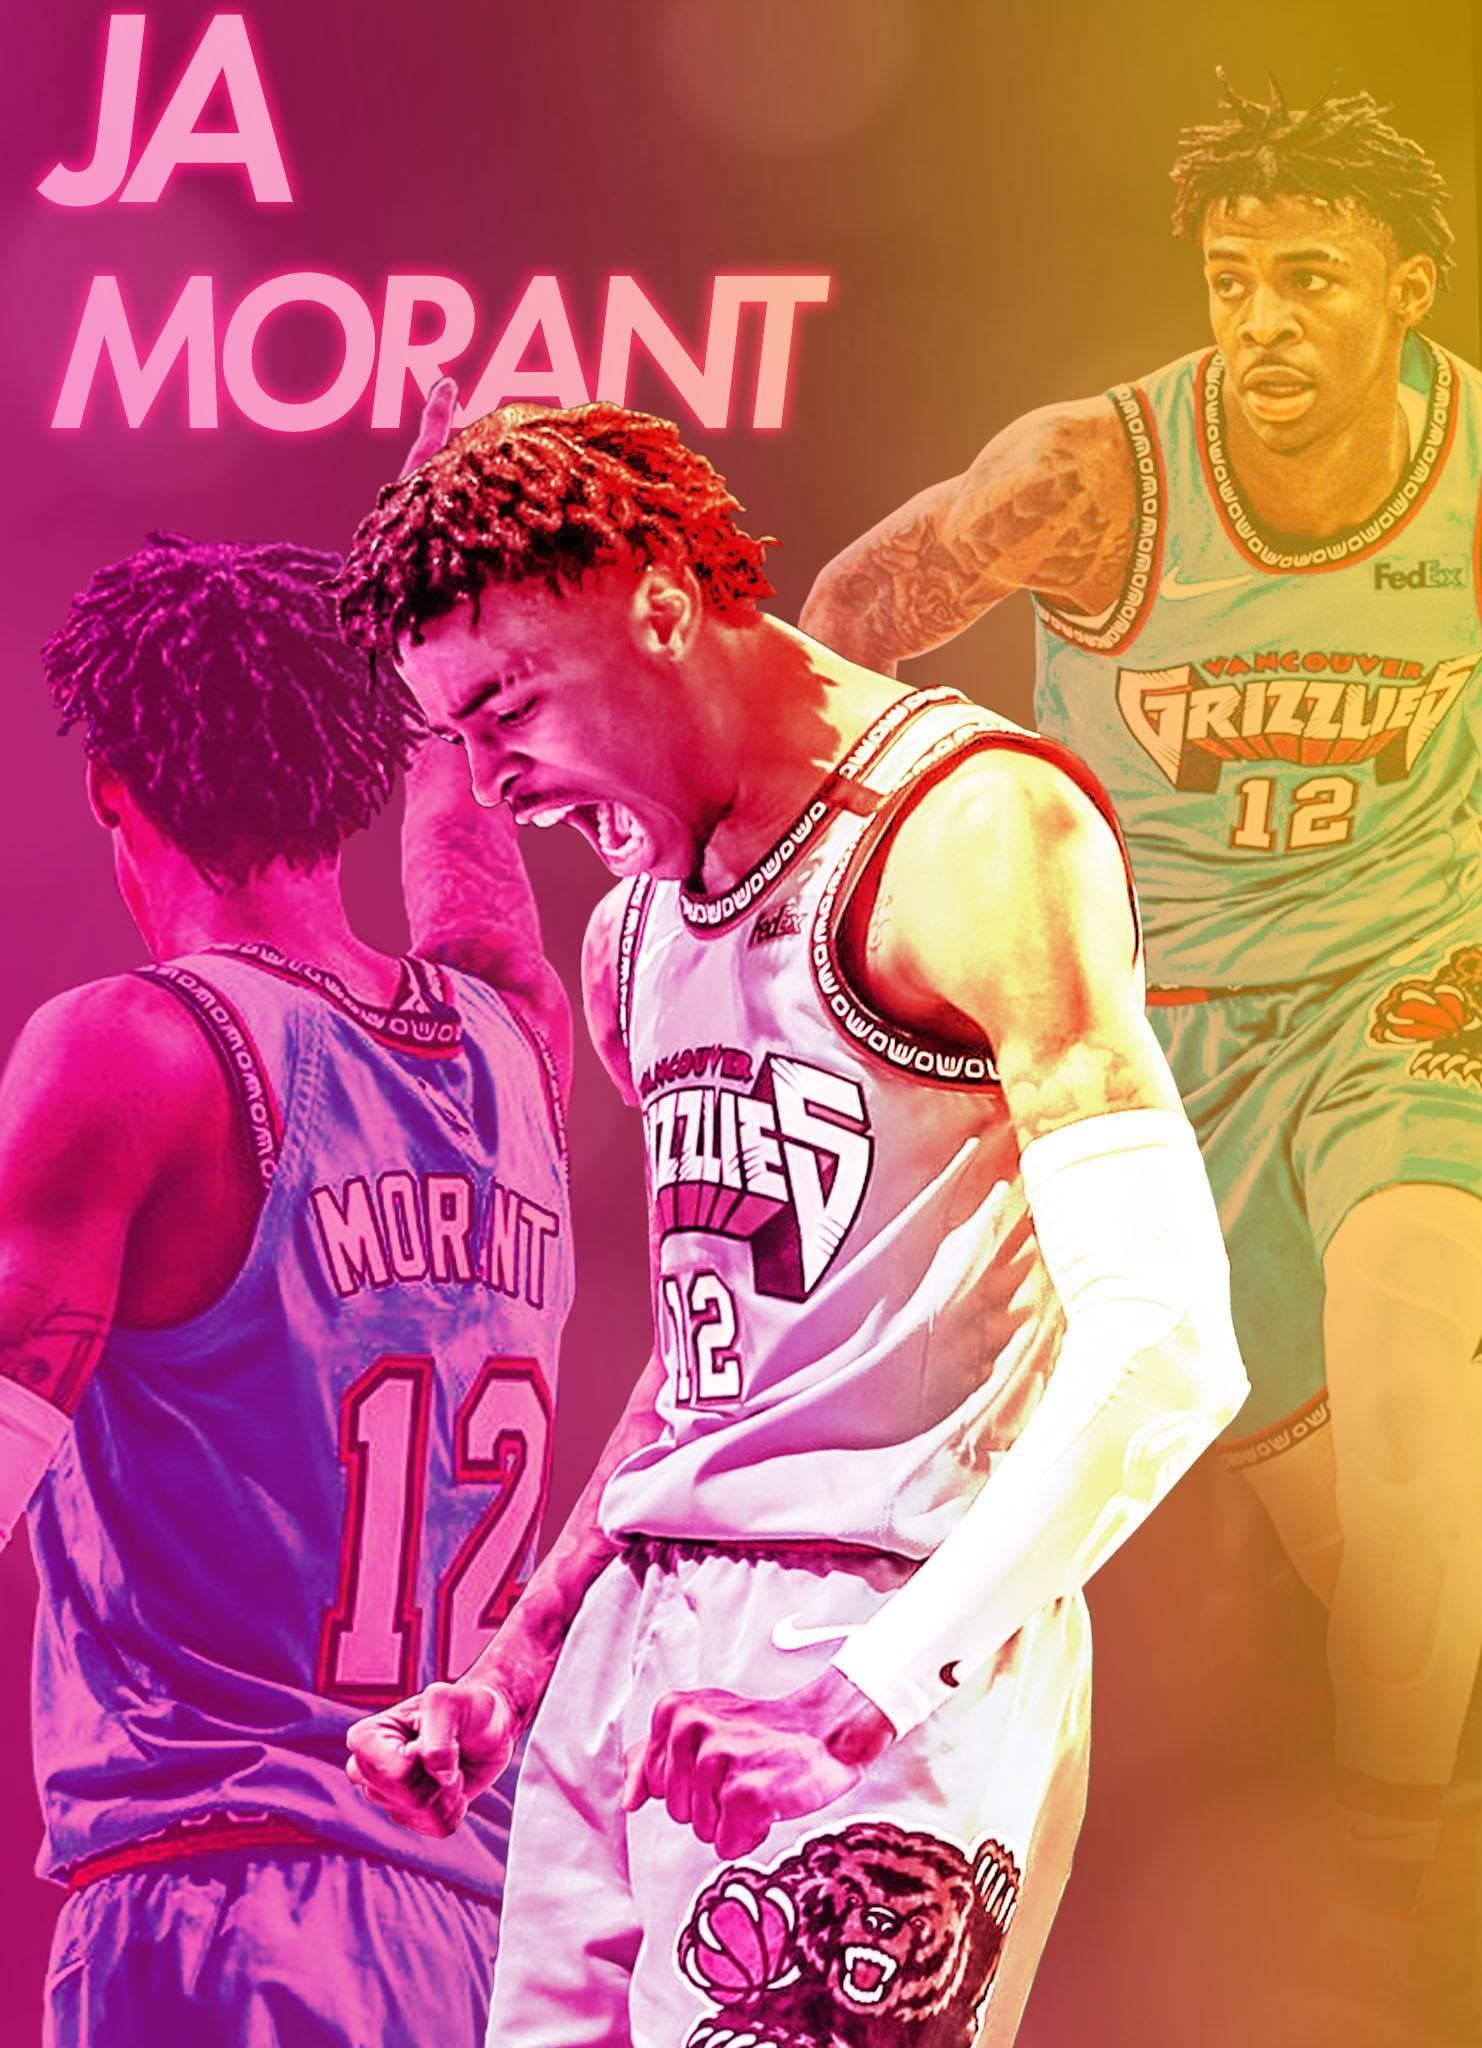 Ja Morant is a basketball player for the Memphis Grizzlies. - Ja Morant